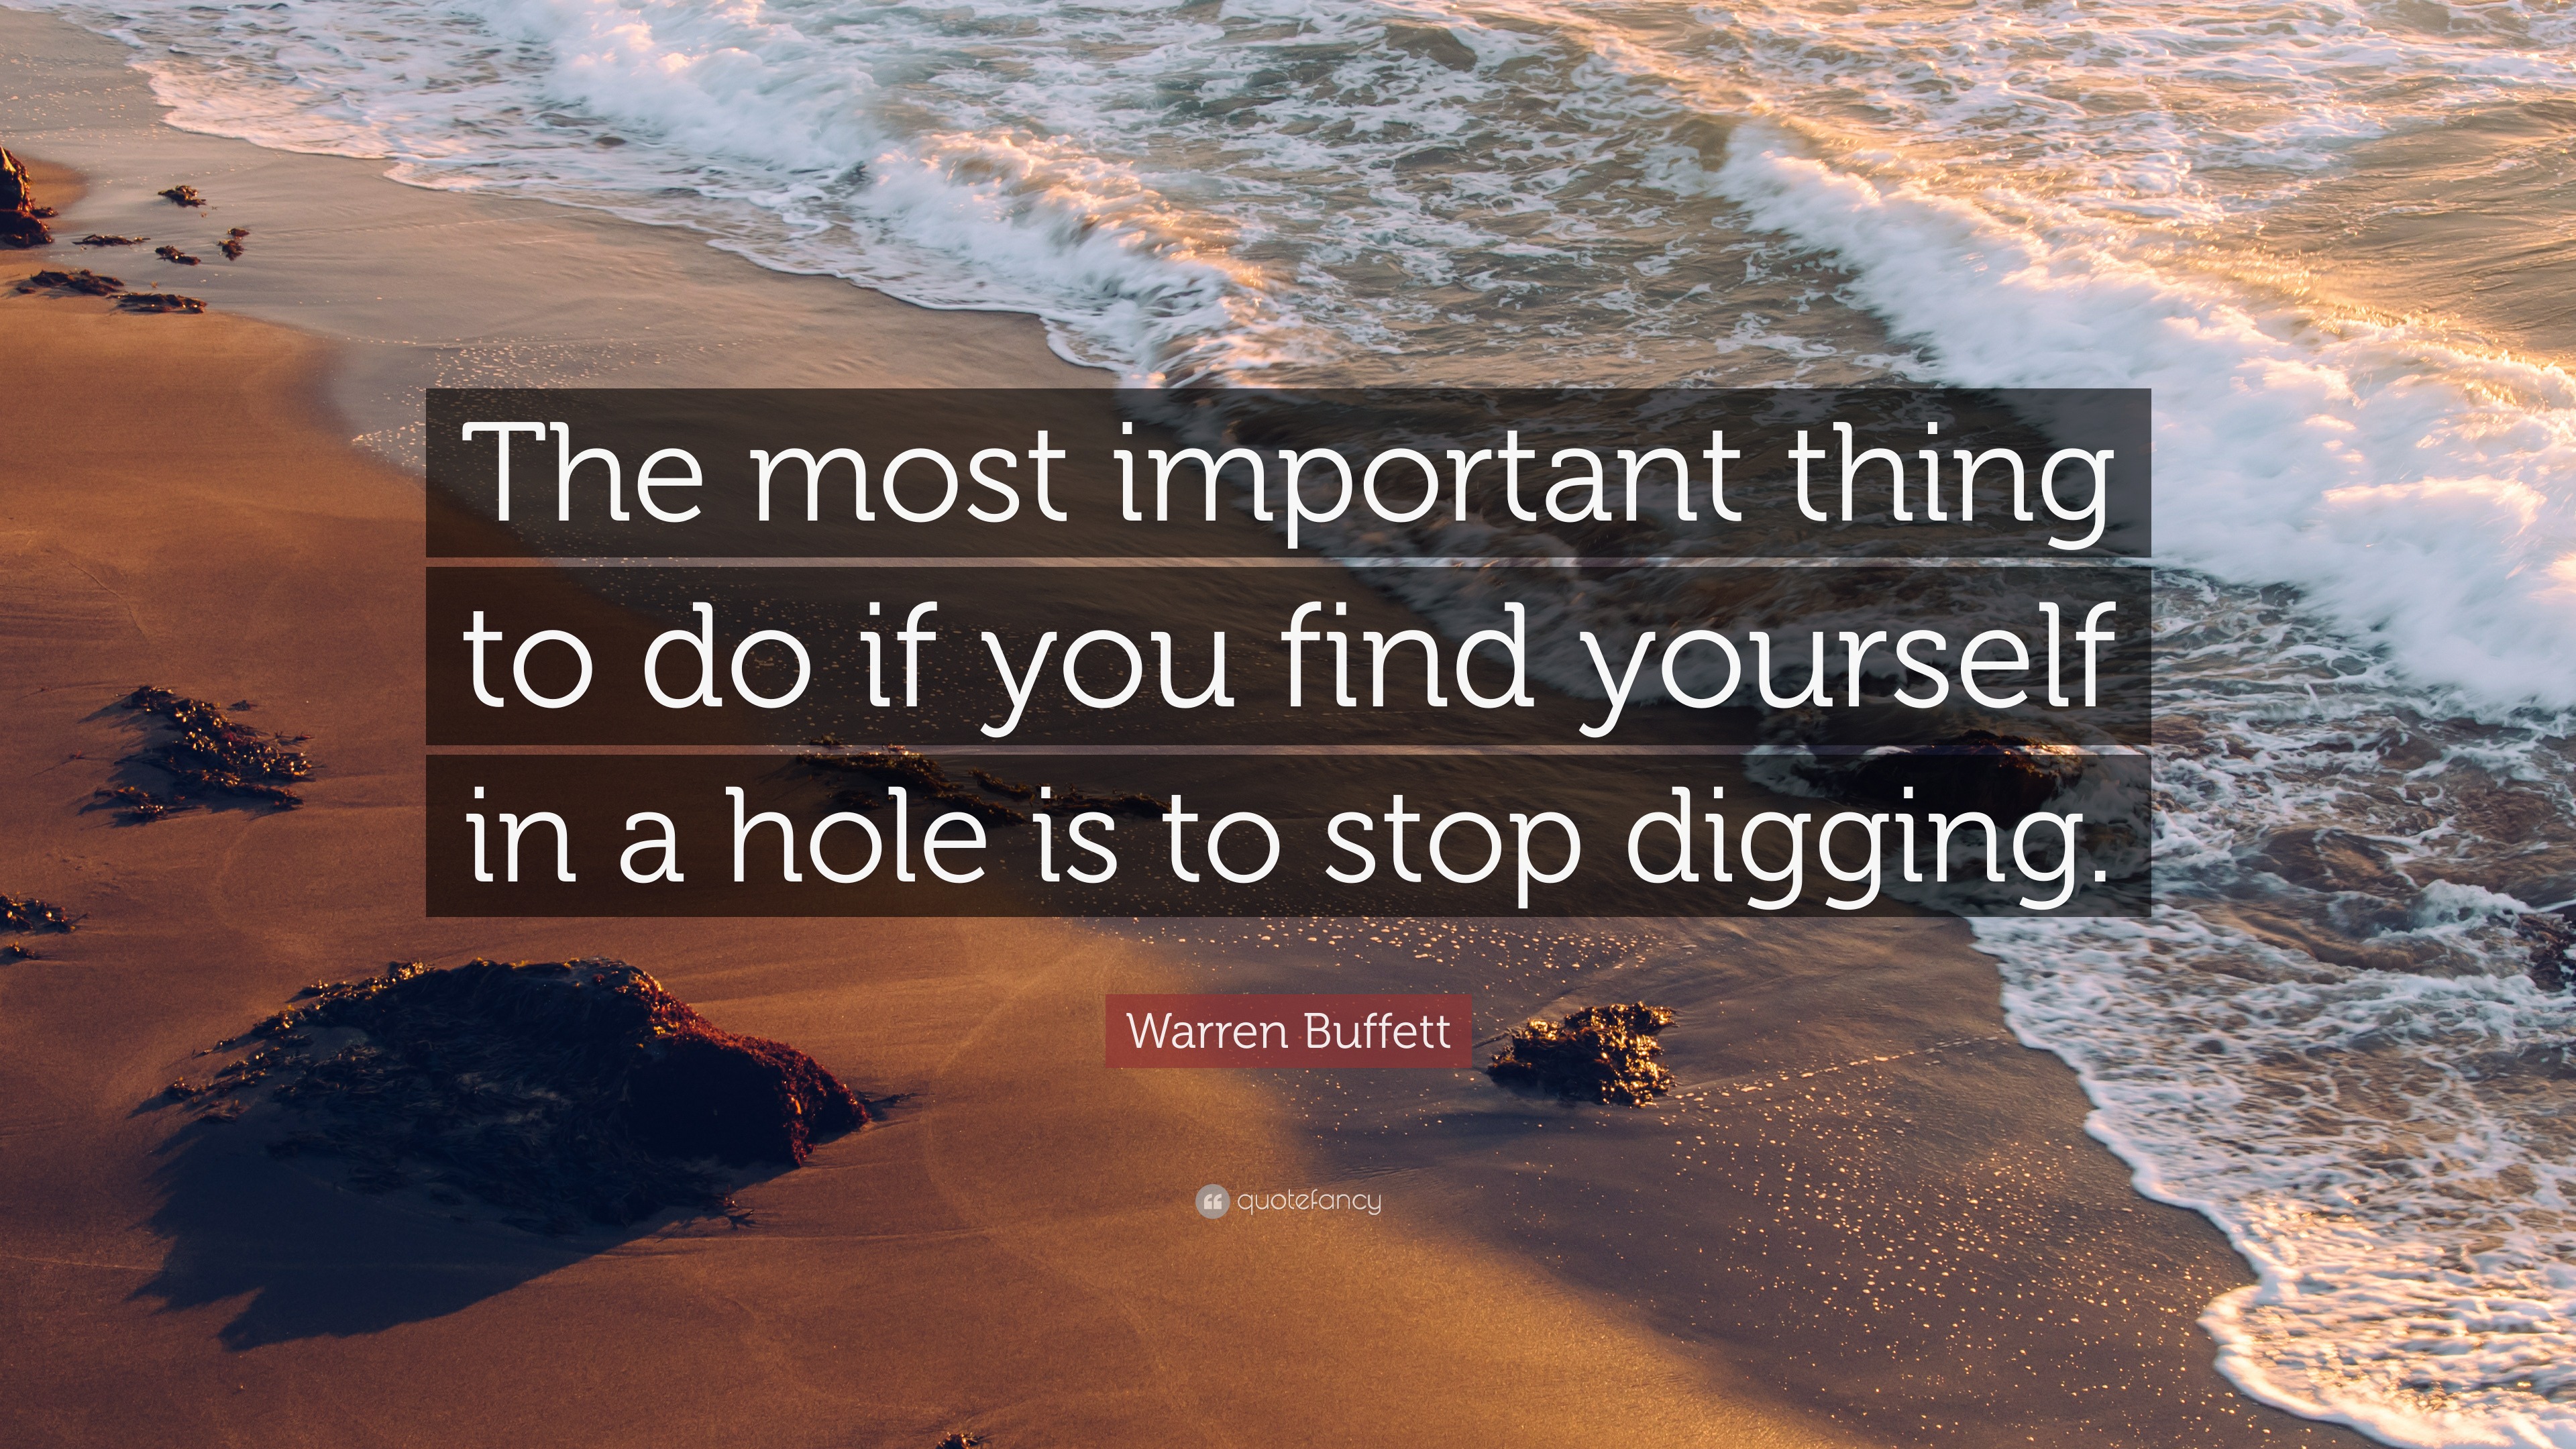 Warren Buffett Quote “The most important thing to do if you find